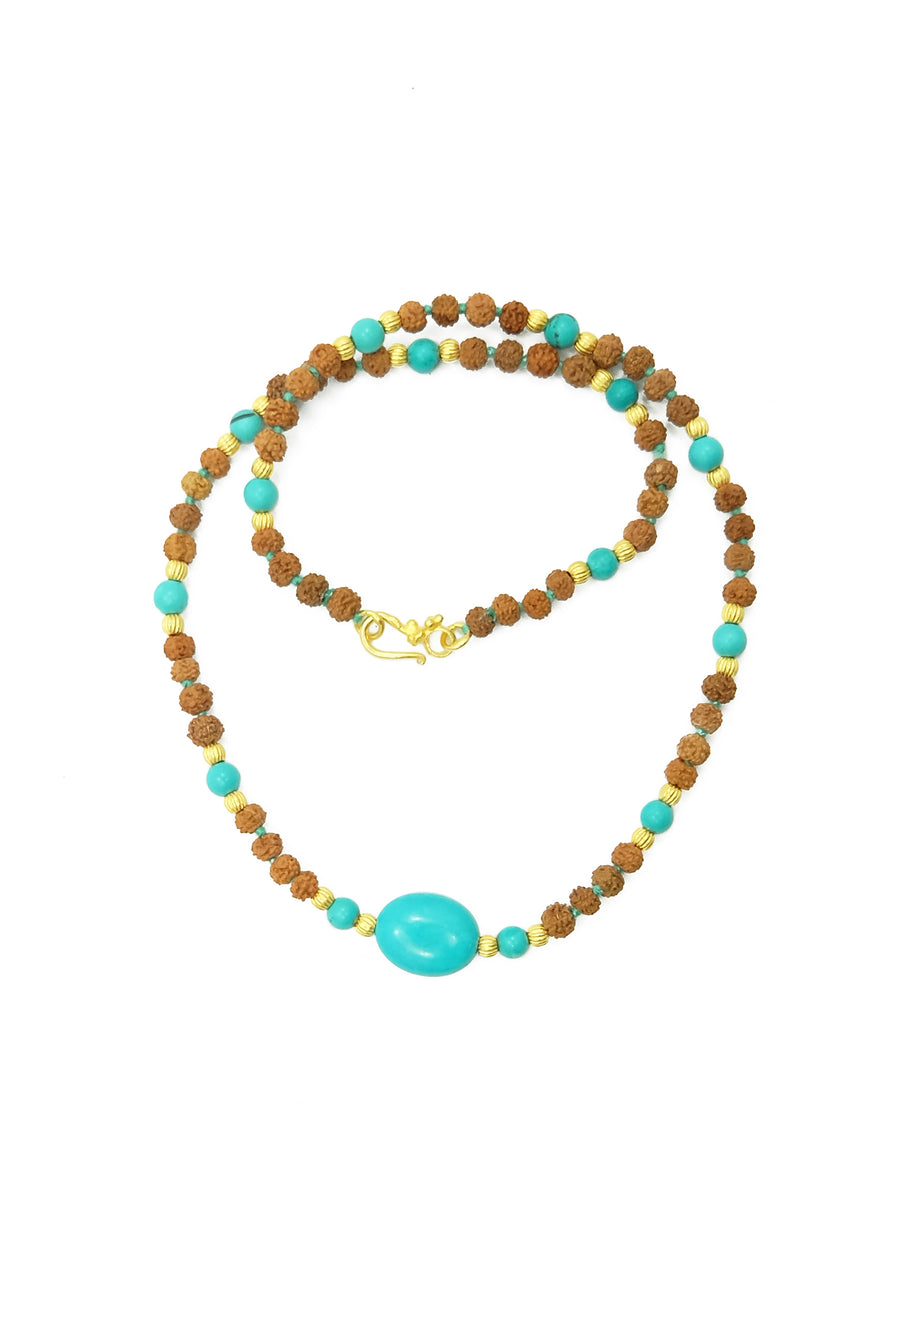 Azure Waves choker length necklace made from rudraksha seeds, turquoise beads and 22k gold accents.